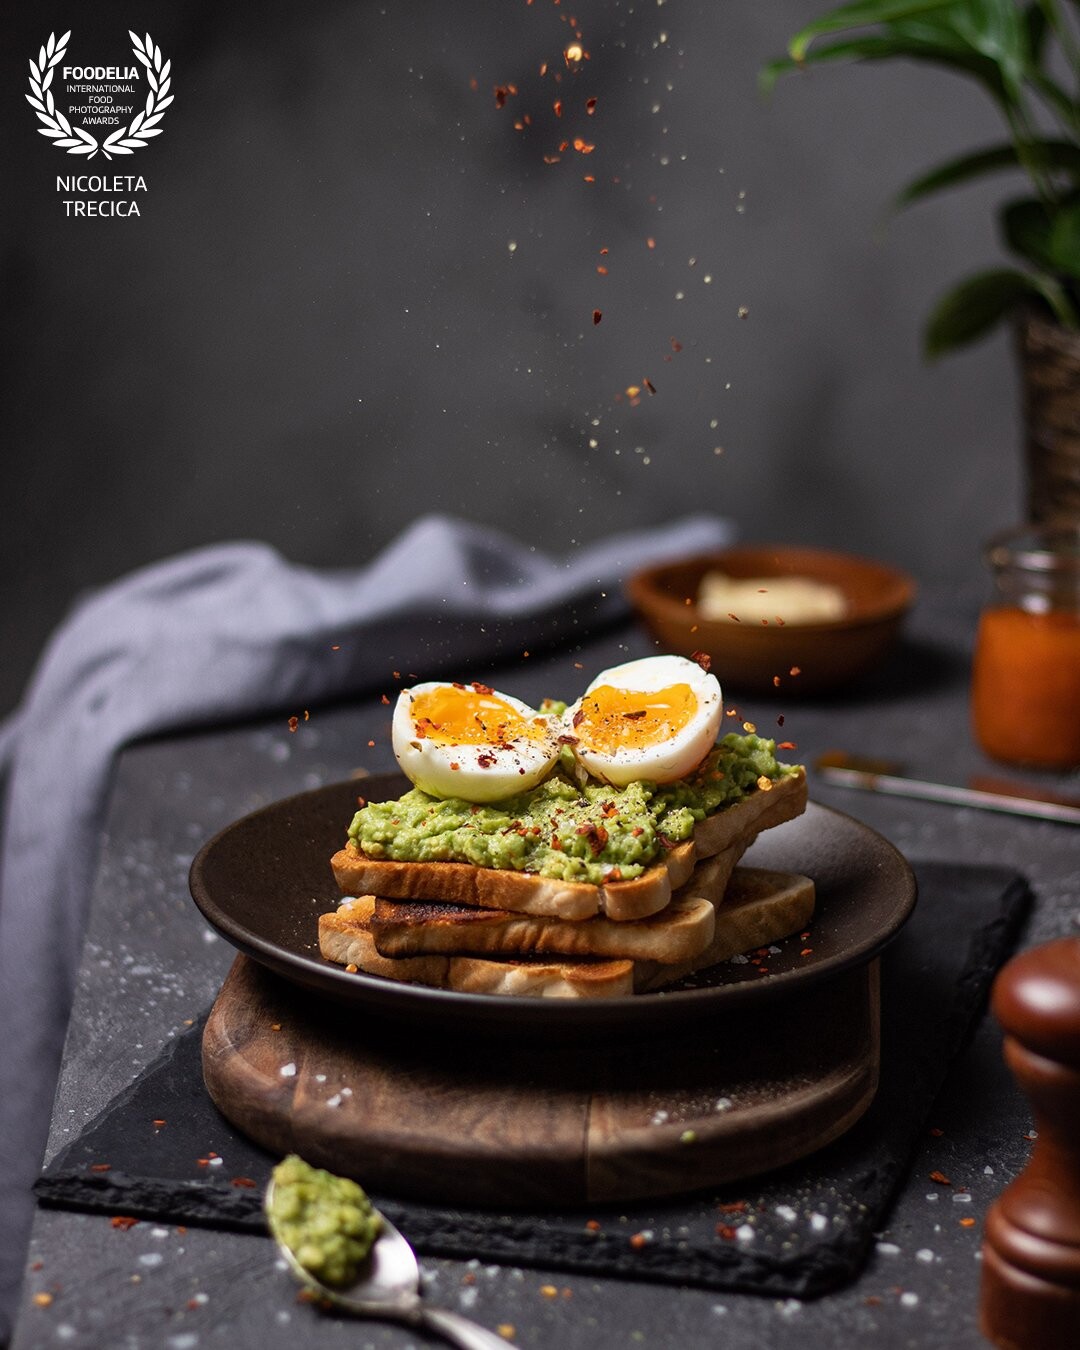 Because is January and we are trying more healthy food, I had in mind a photo with avocado toast and eggs. For this photo I chose to recreate a home table in a breakfast atmosphere adding the spices.